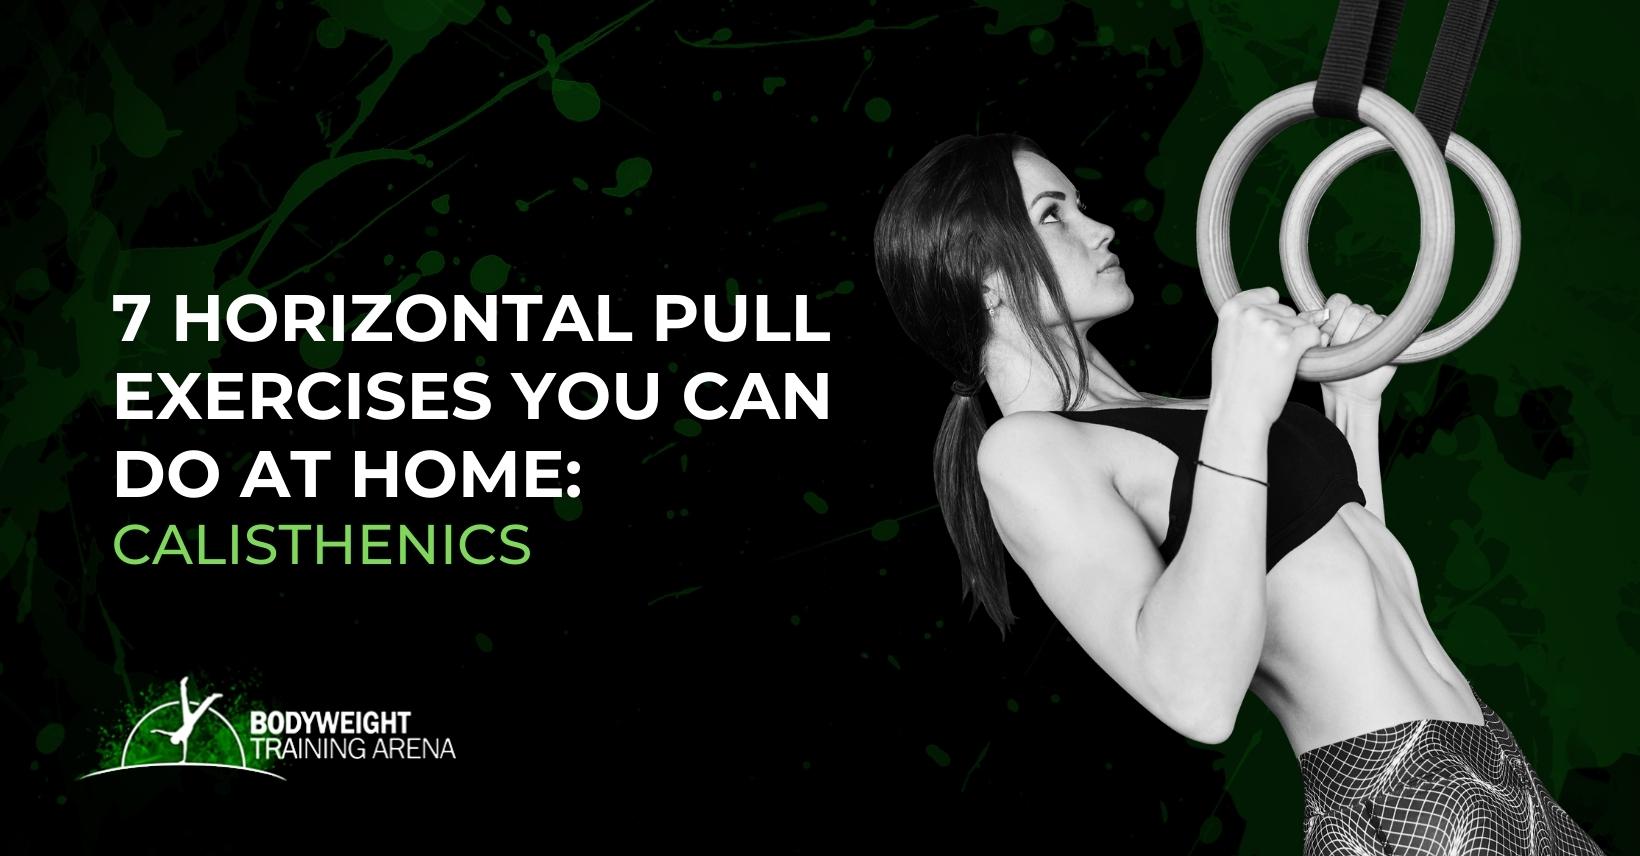 7 Horizontal Pull Exercises You Can Do at Home: Calisthenics